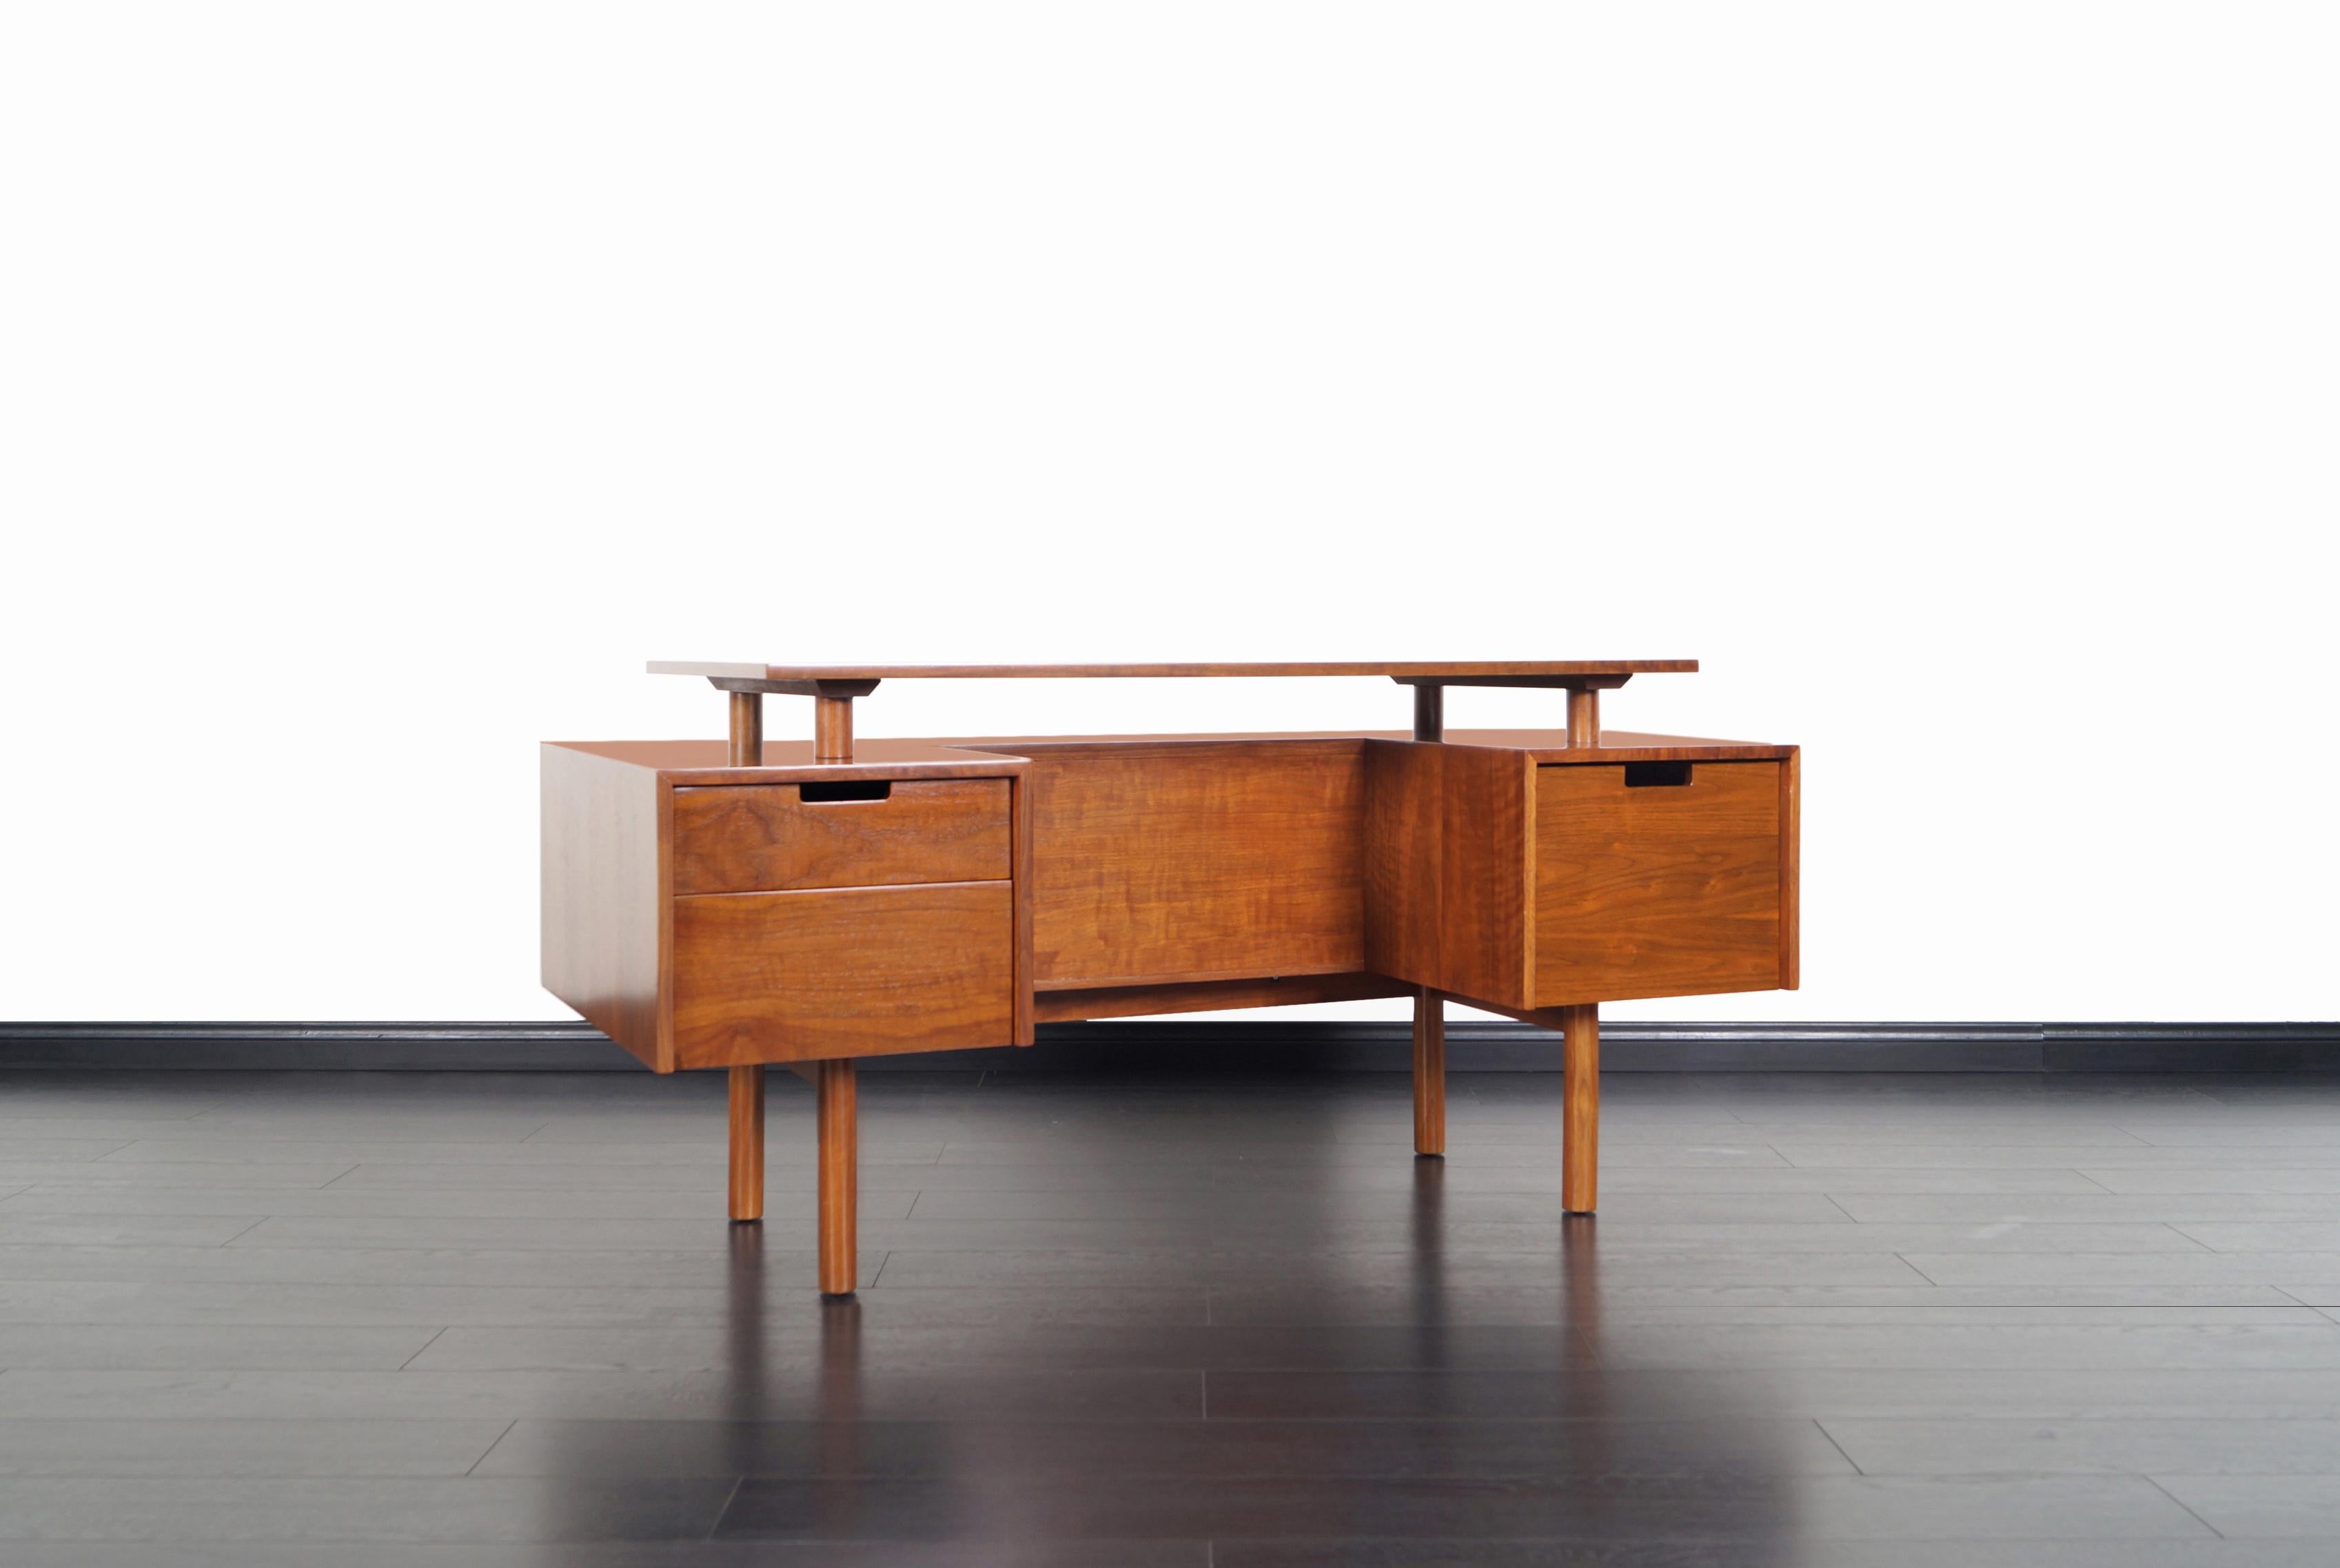 Early midcentury desk designed by Milo Baughman for Glenn of California. This exceptional crafted desk features two pull-out drawers and a file drawer. On the opposite side of the desk there's an open space for additional storage or display options,